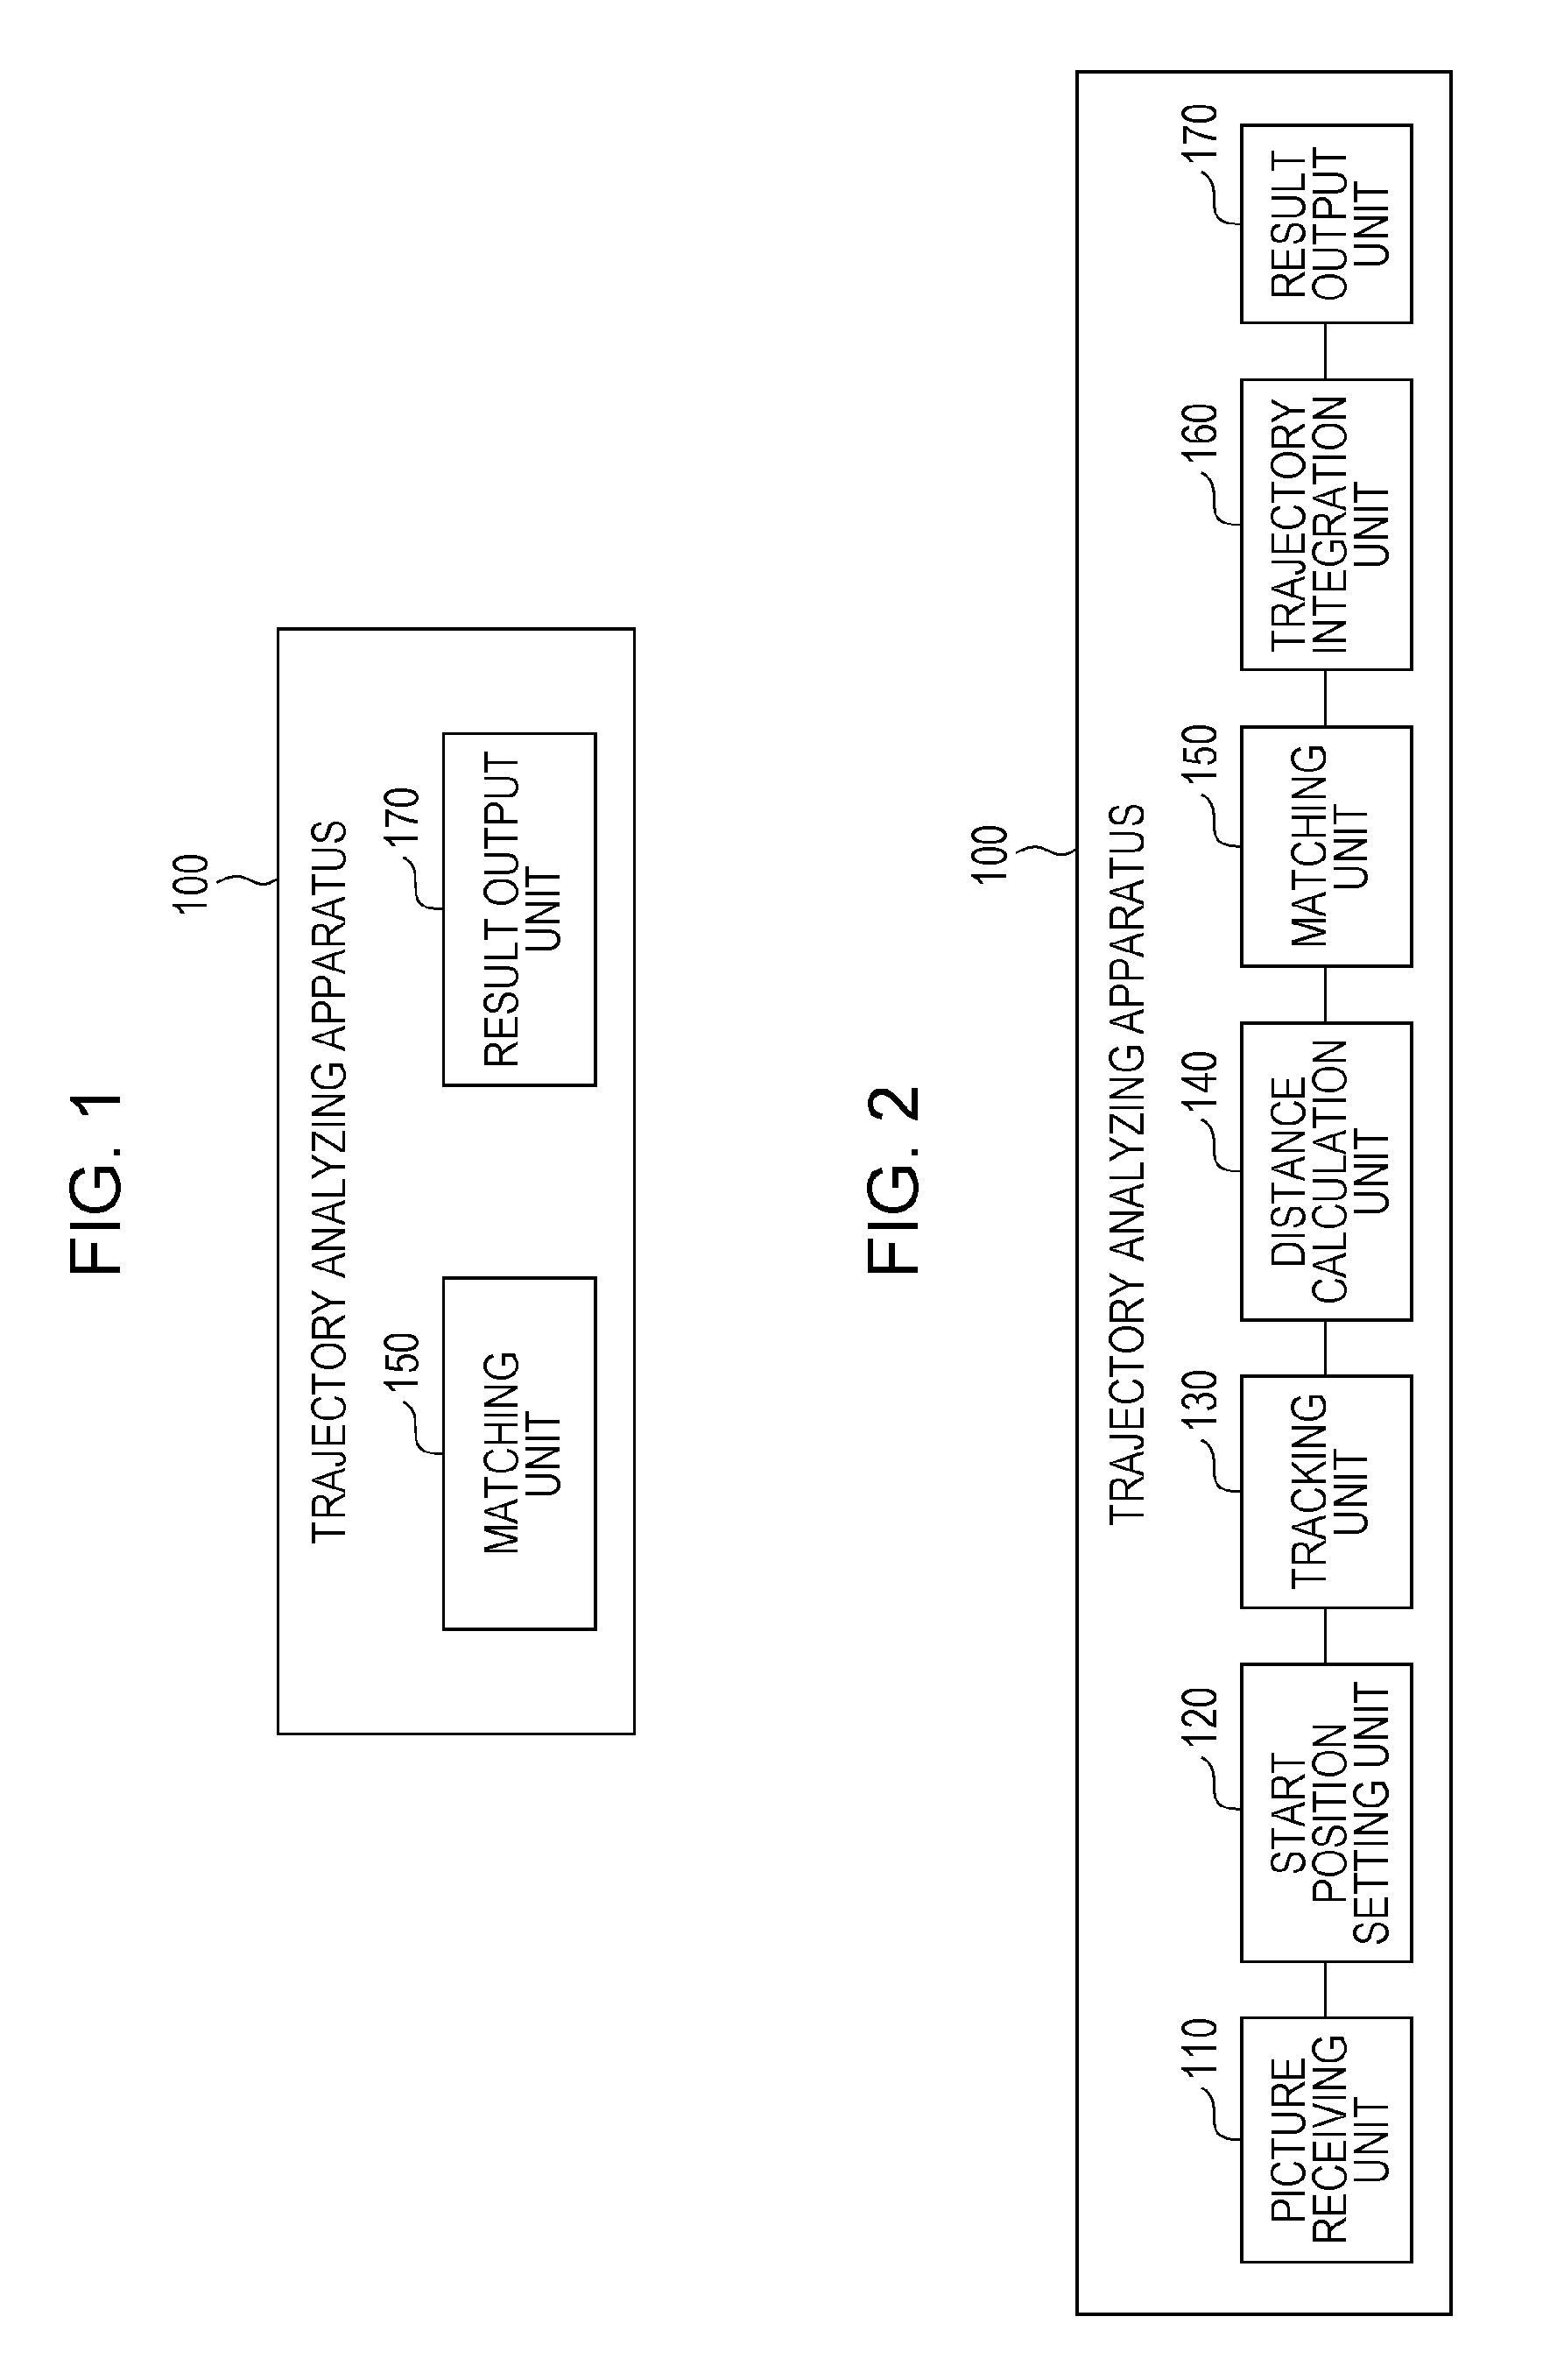 Apparatus and method for analyzing trajectory